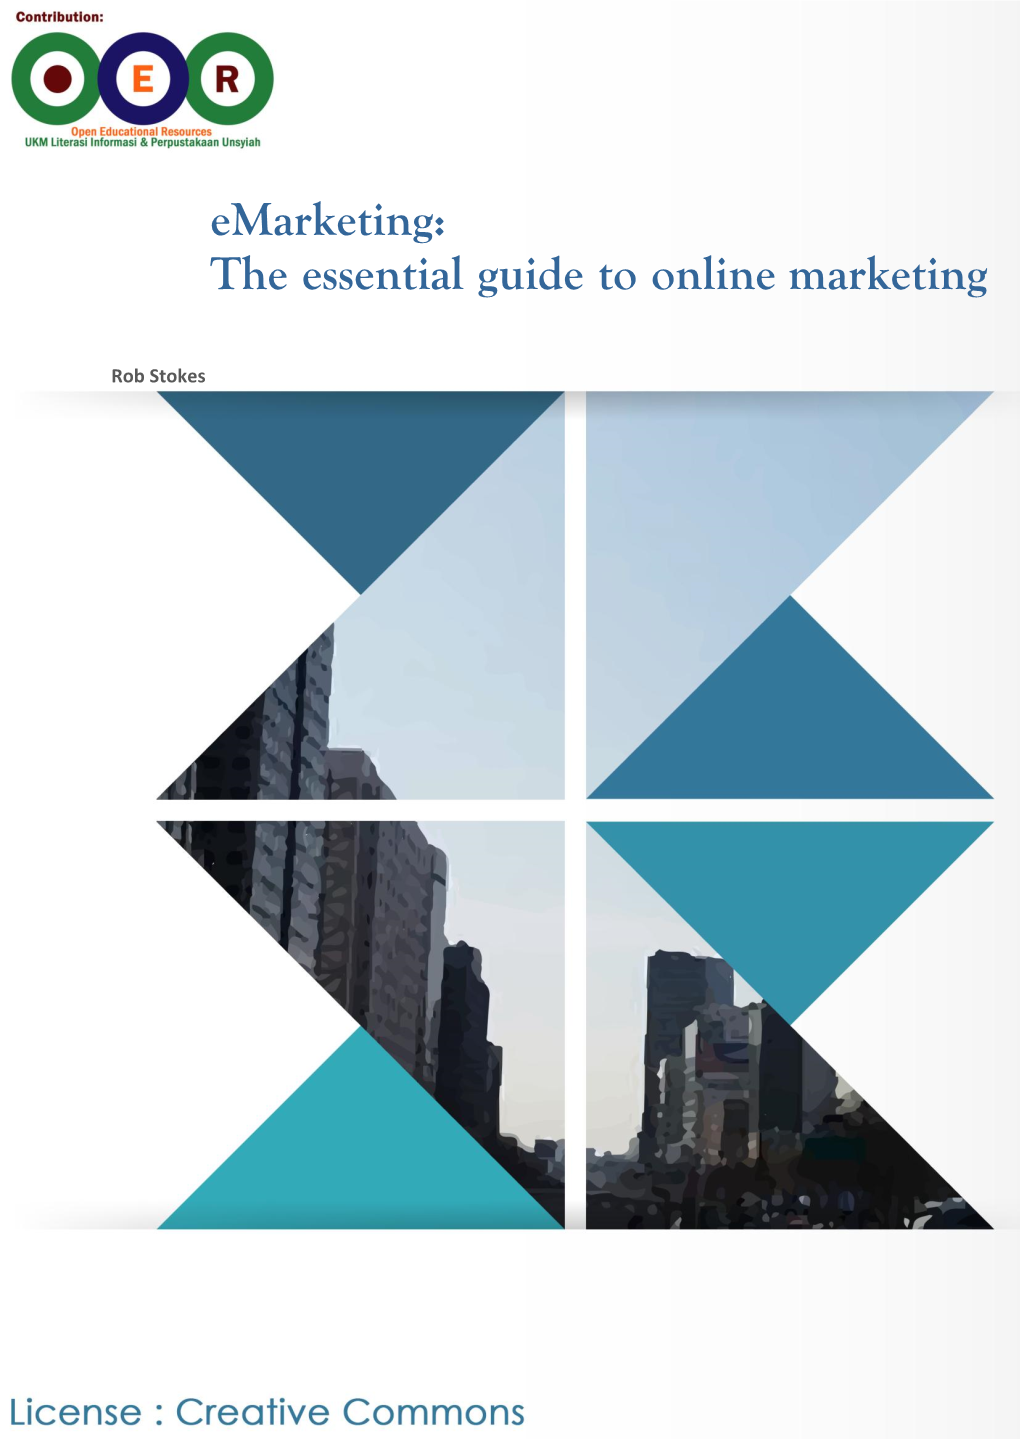 Emarketing: the Essential Guide to Online Marketing